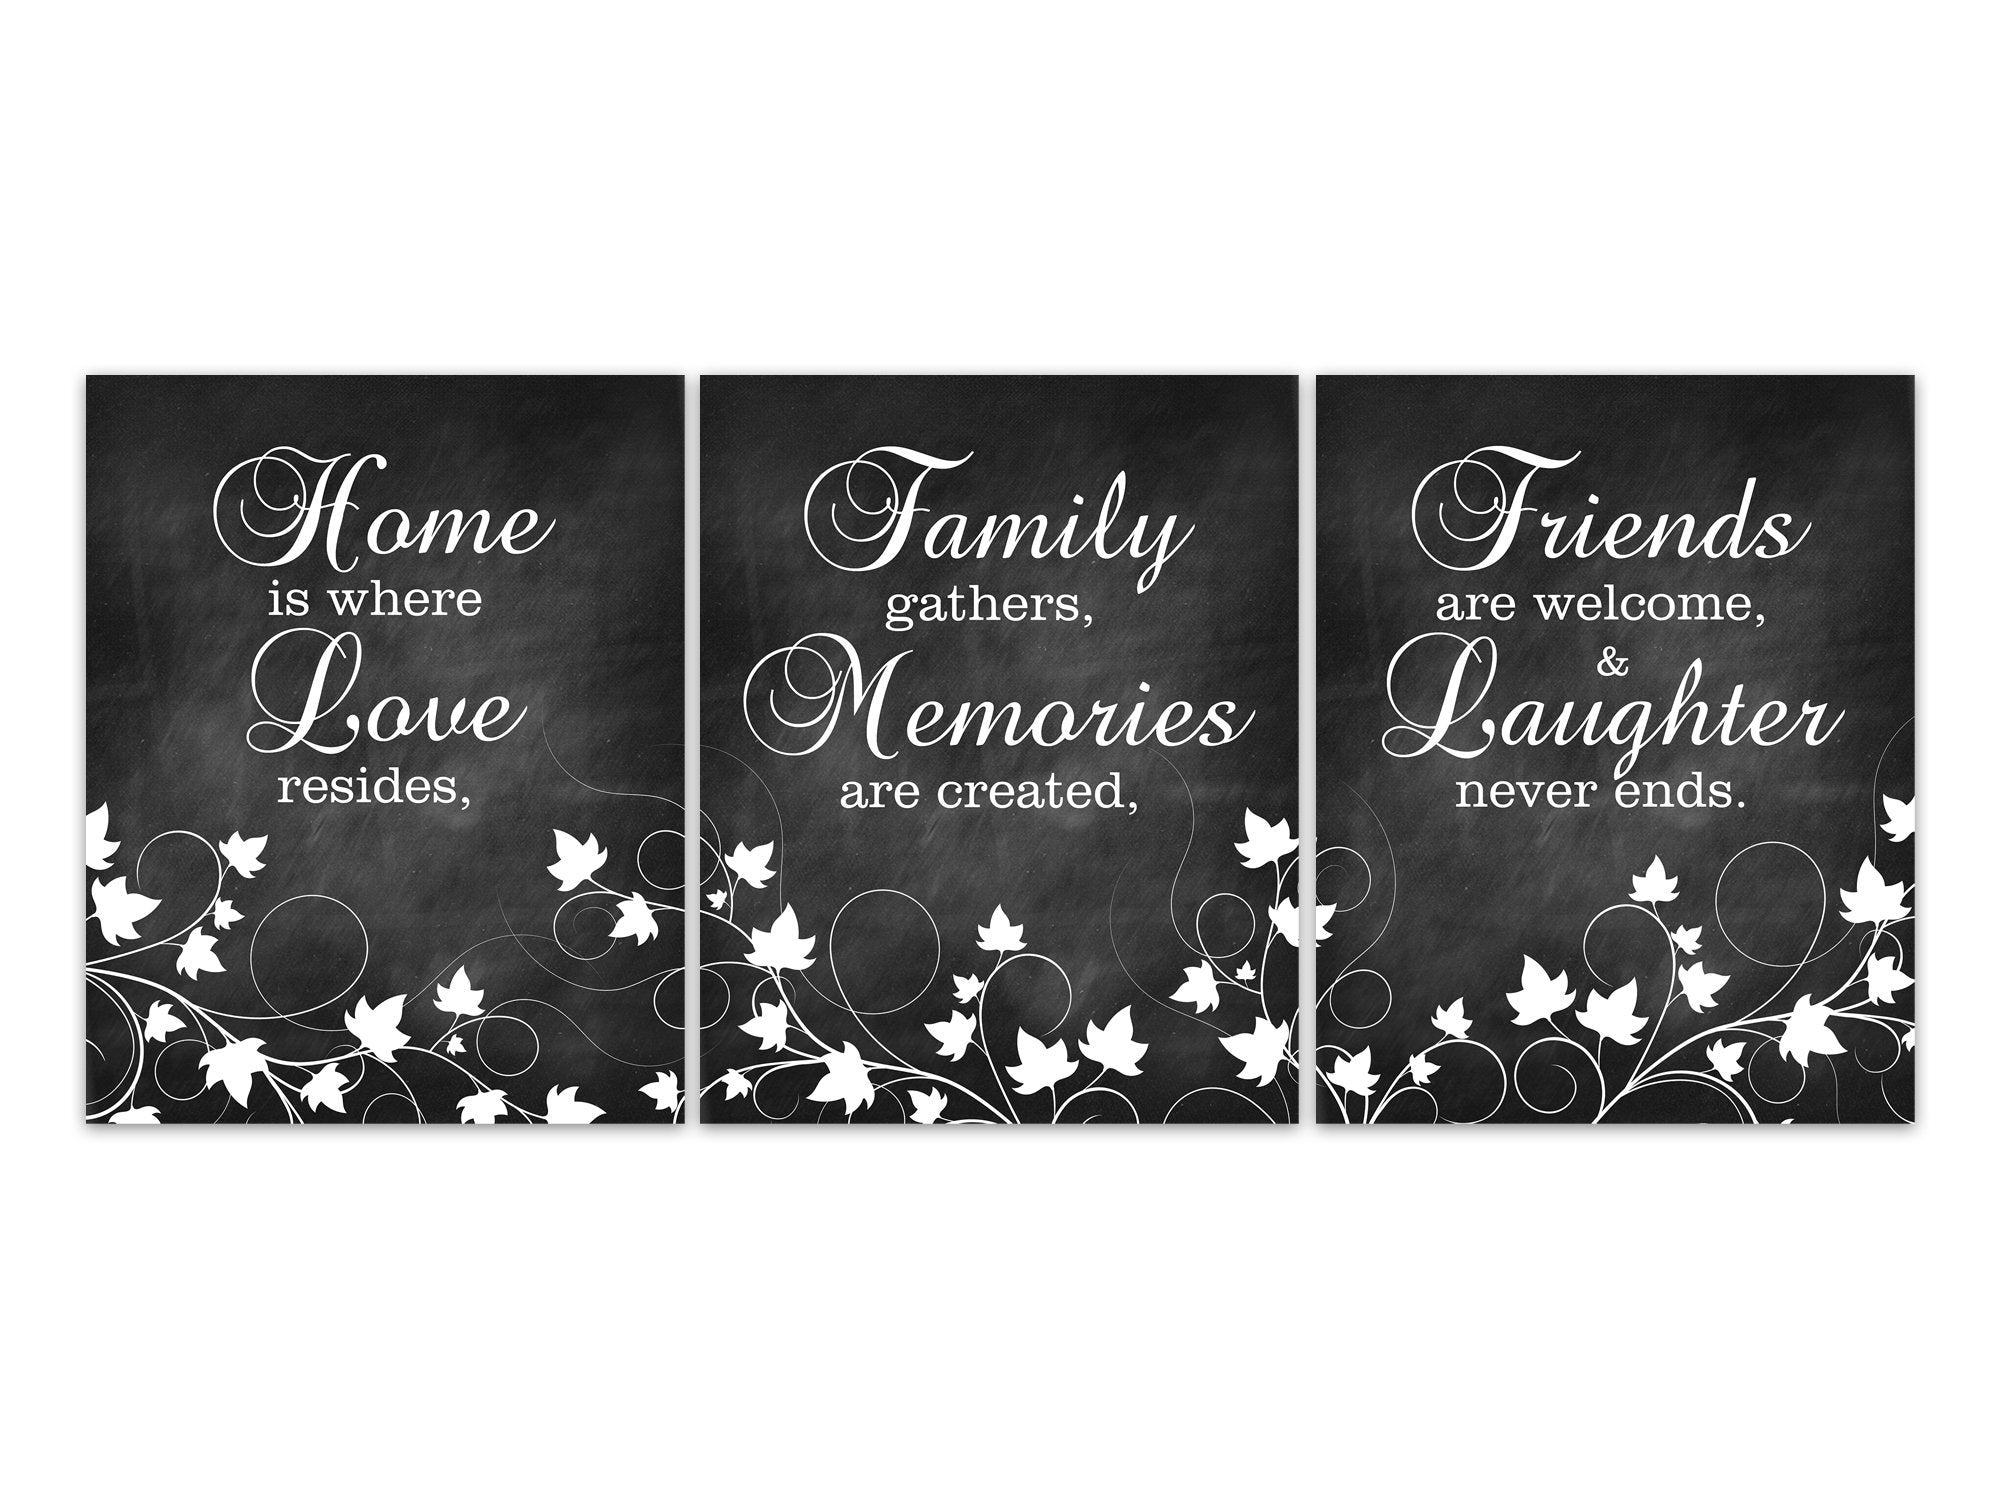 Home Is Where Love Resides, Memories Are Created, Family Gathers, Chalkboard Home Decor CANVAS, Friends and Laughter, Ivy Artwork - HOME443